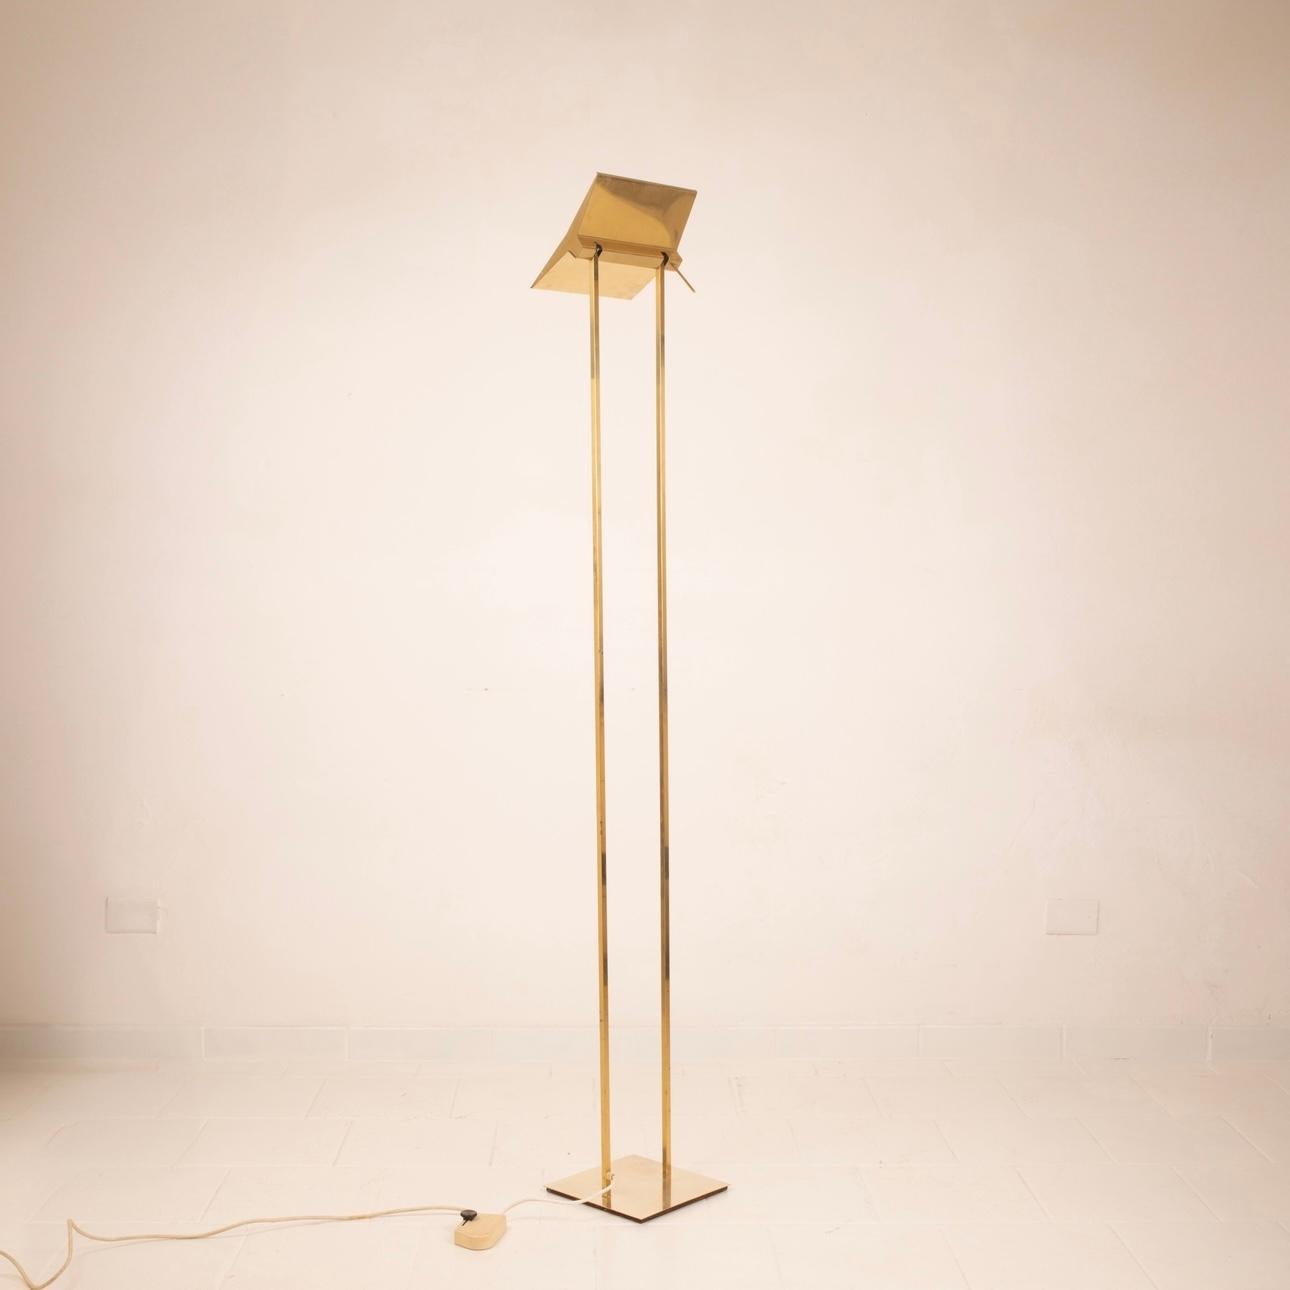 Stunning Concord model floor lamp designed and produced by Marco Zotta in the 1980s in italy.
Made entirely of solid brass, it has a square base and two stems, also square, supporting the hat, which in section resembles the shape of the Concord's